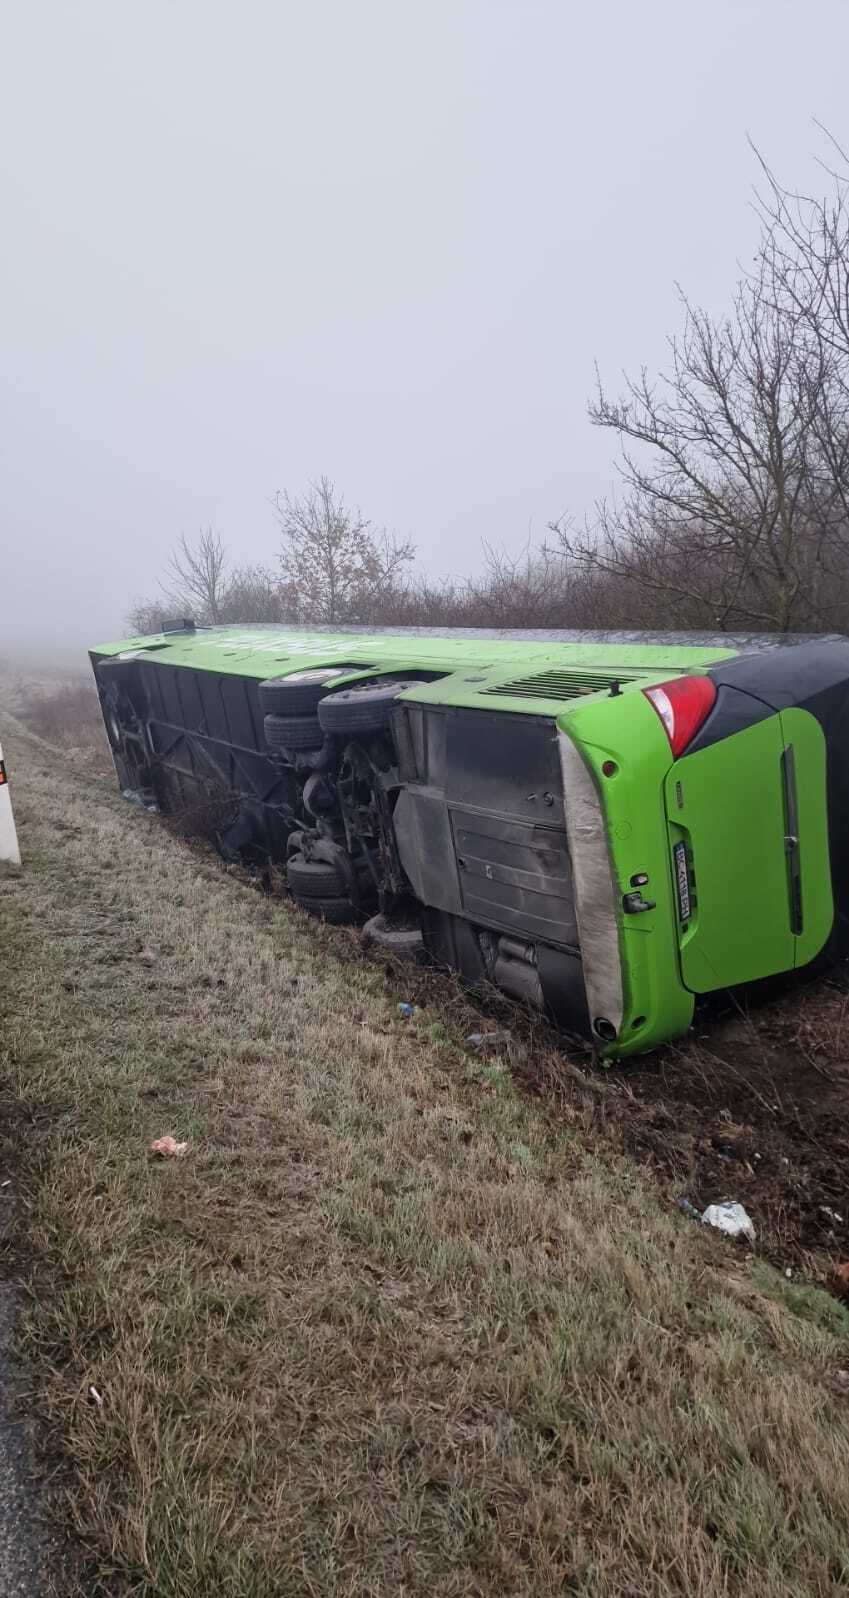 An overcrowded bus from Ukraine overturns in Slovakia: children are among the victims. Photo